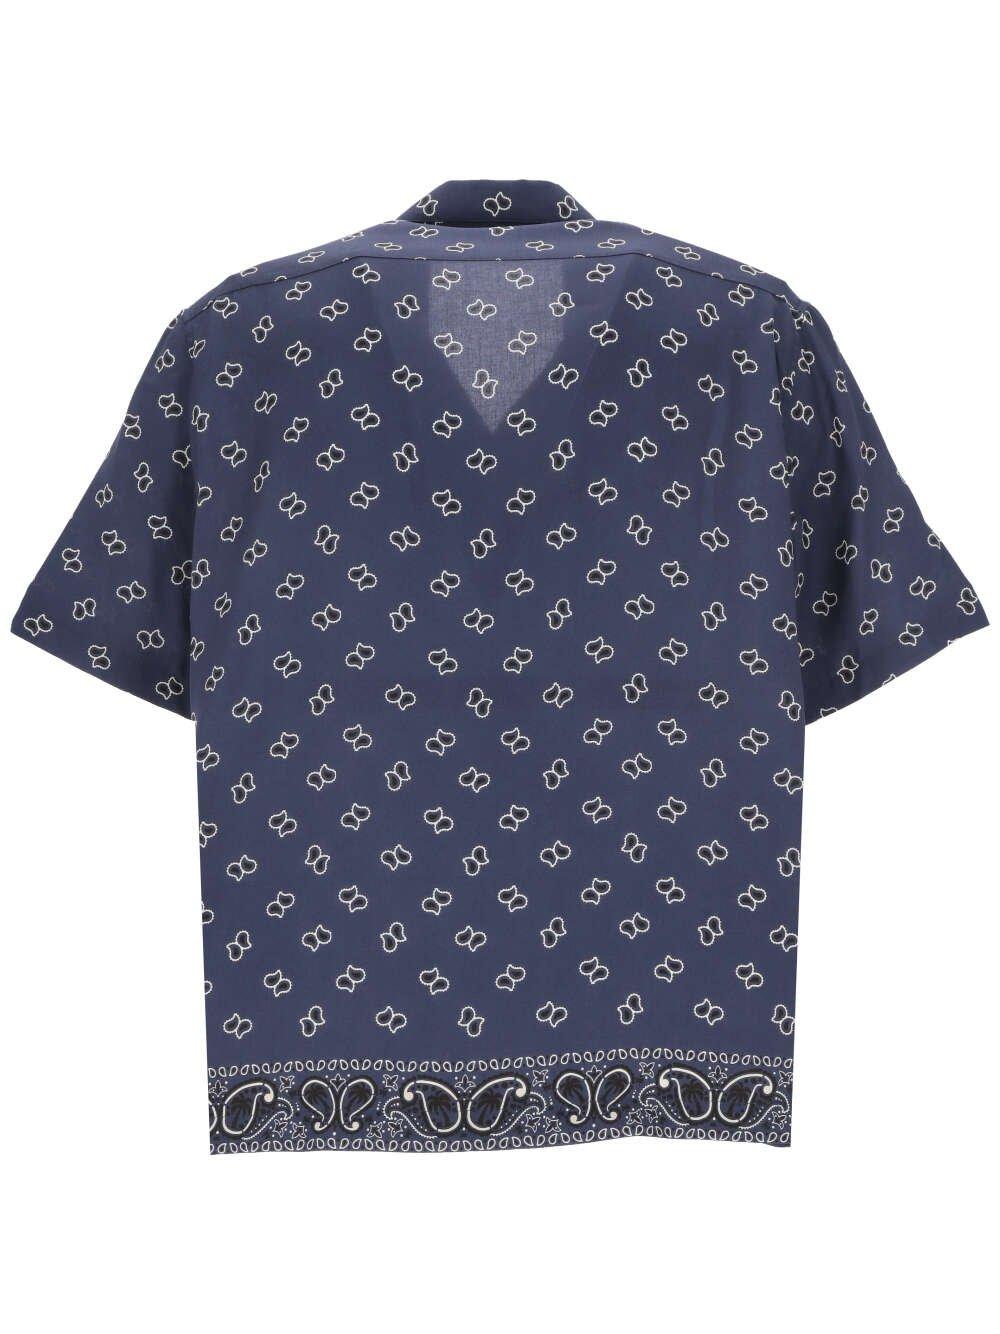 Shop Palm Angels Paisley Printed Bowling Shirt In Navy Blue Navy Blue